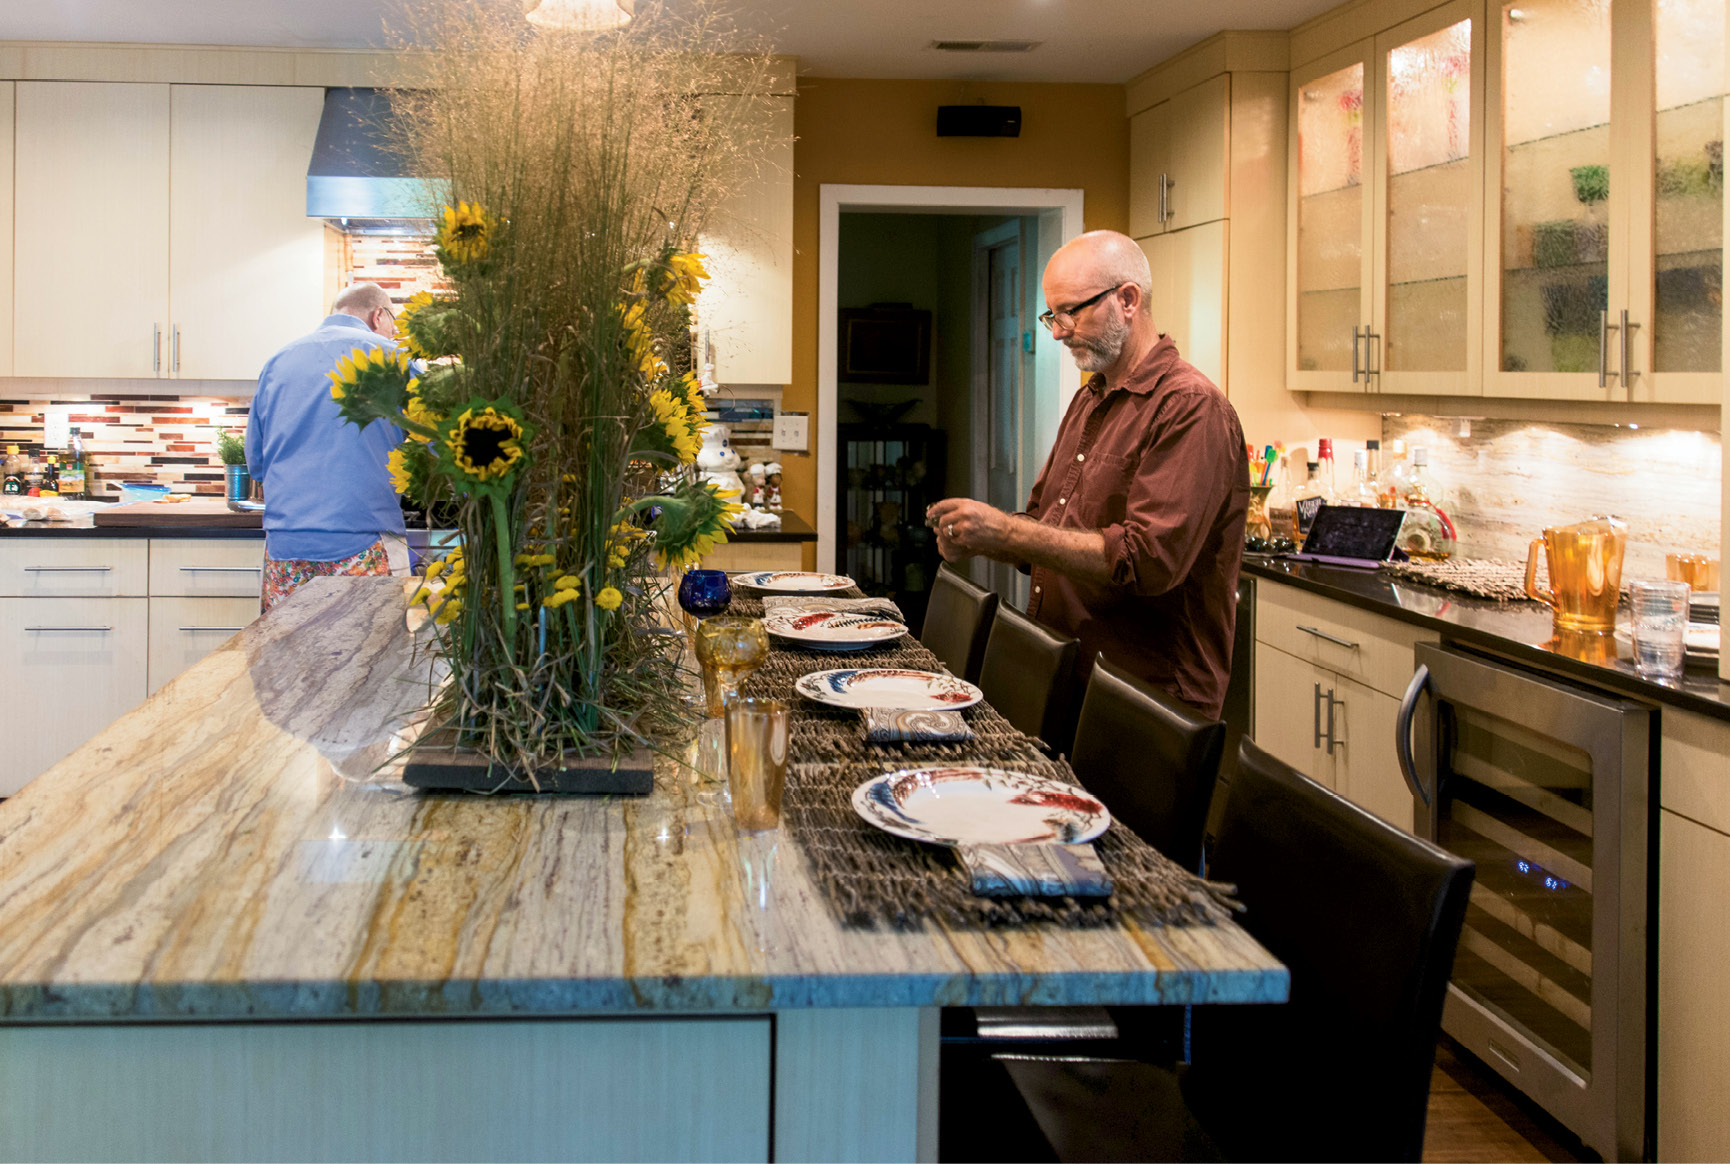 David Vagasky (left) preps the meal while Jim Martin sets the dining space.